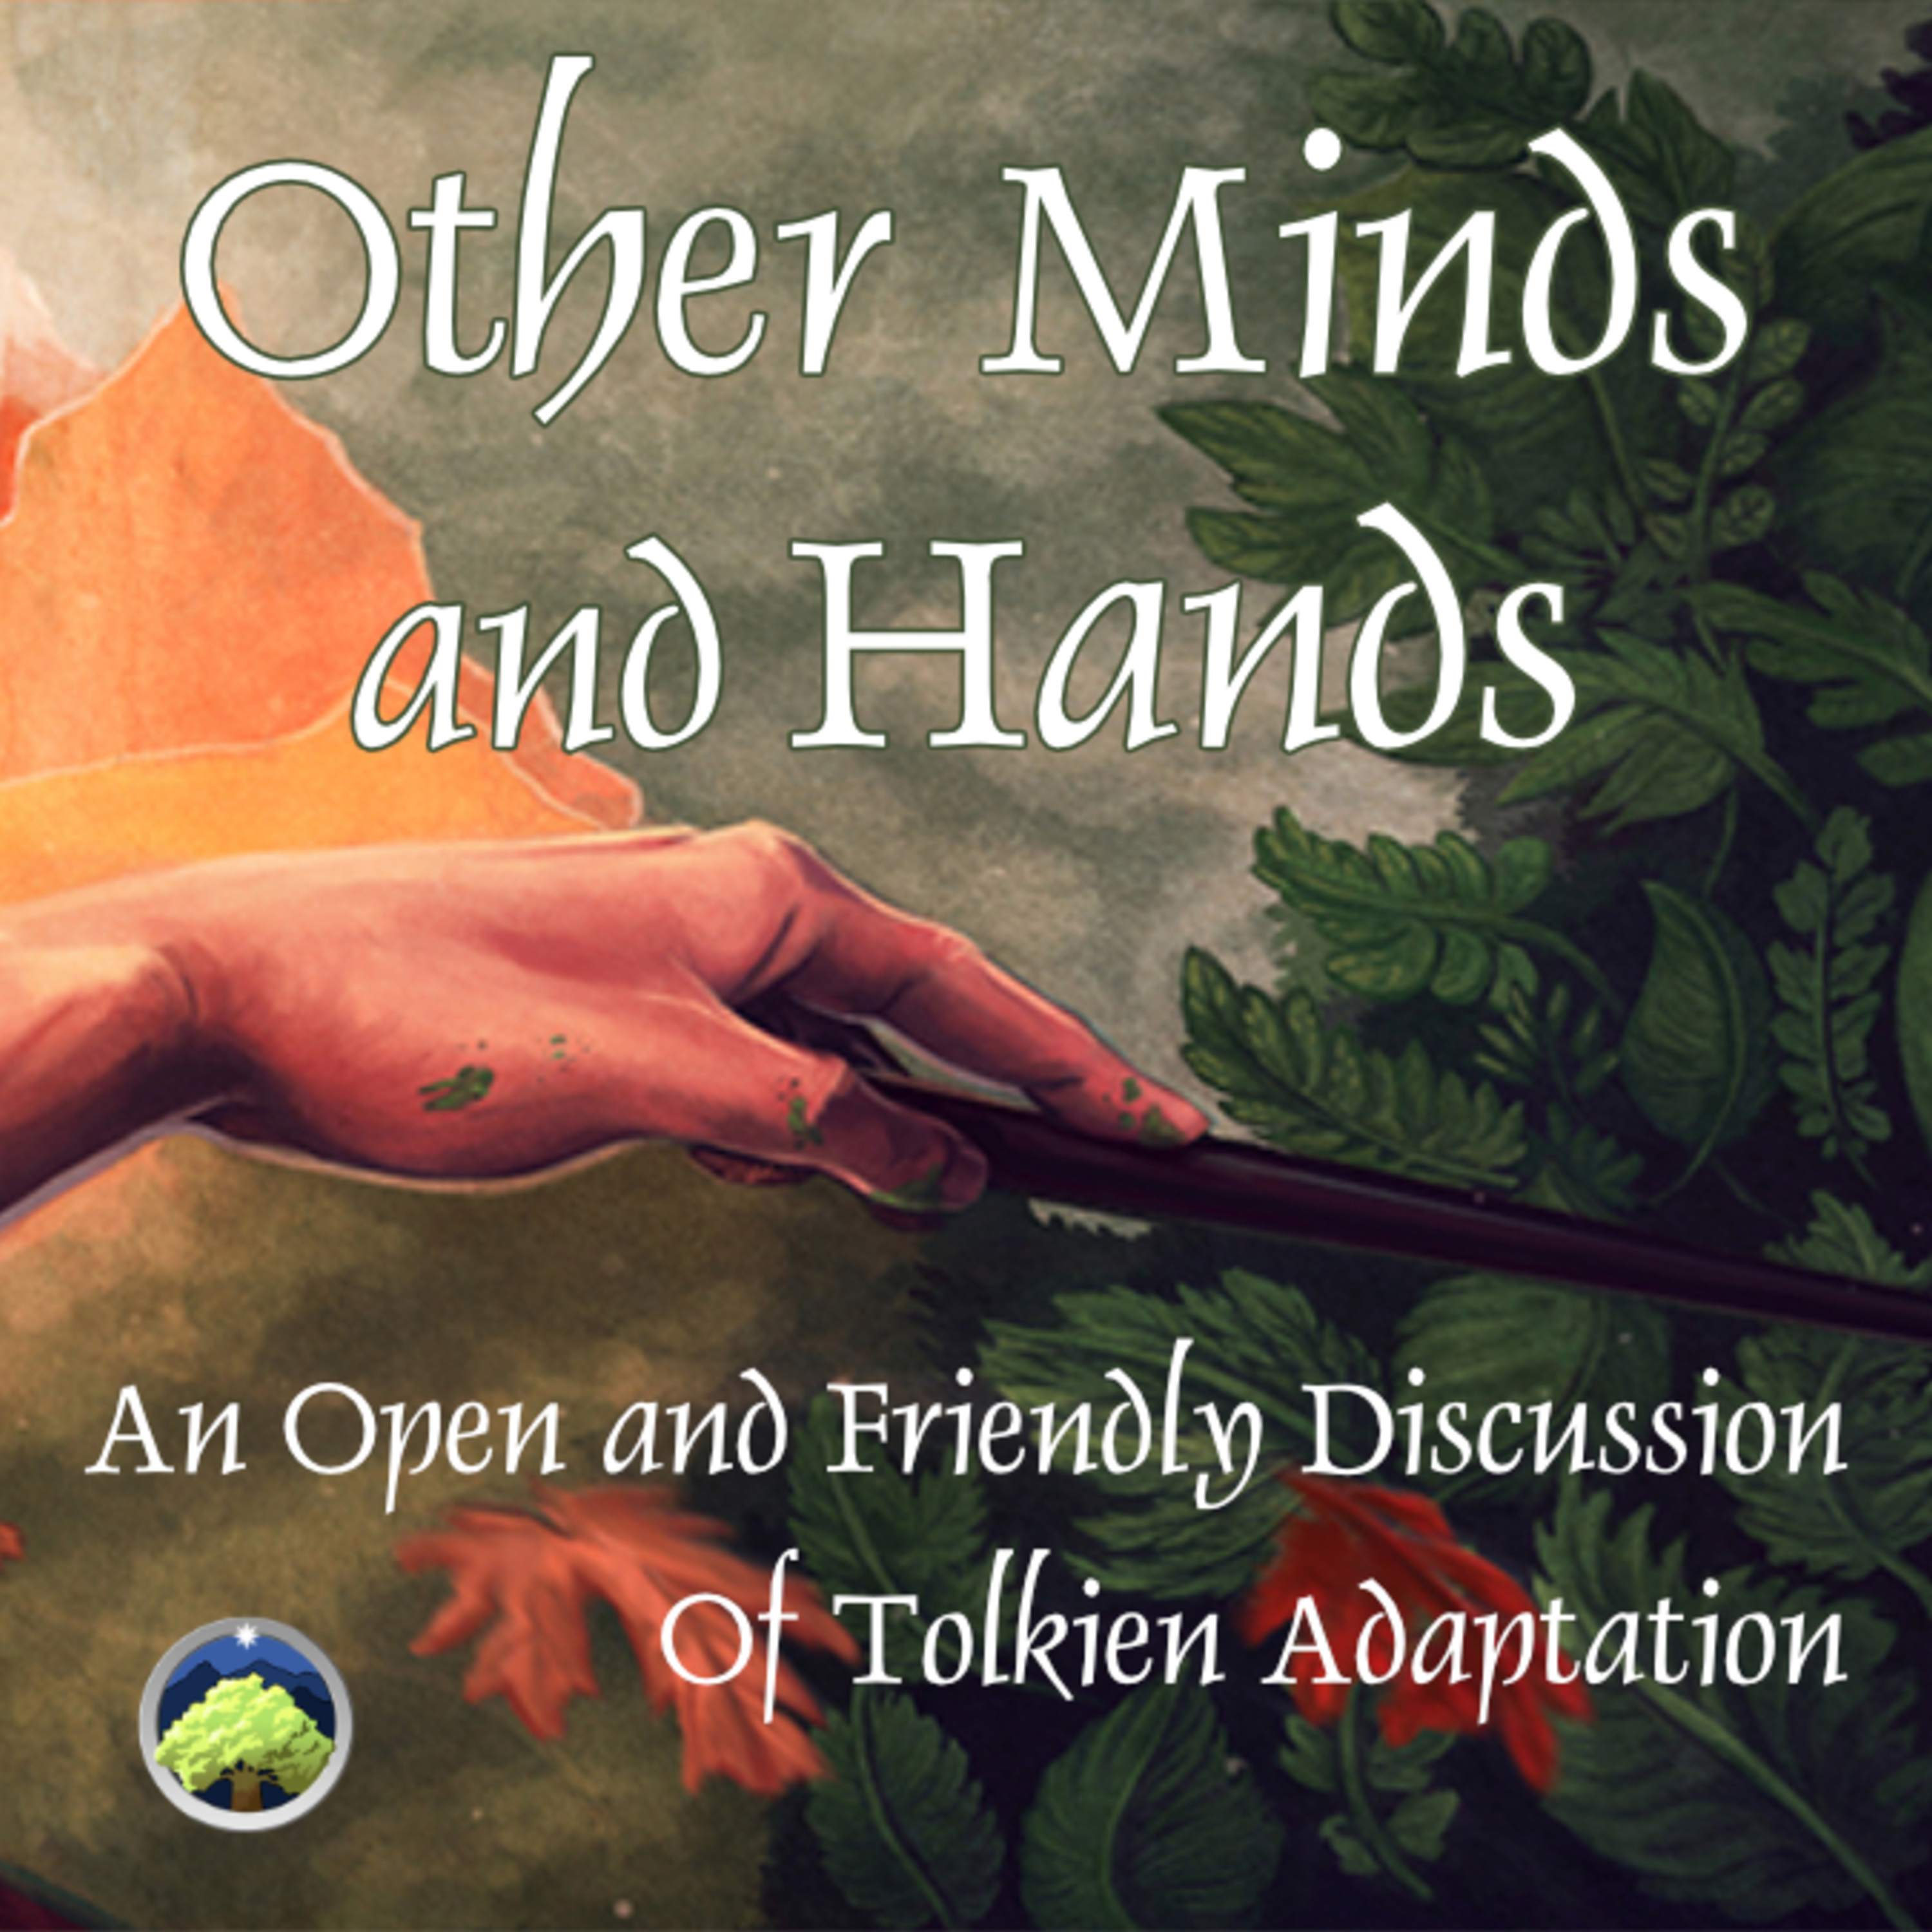 472: Other Minds and Hands, Episode 7